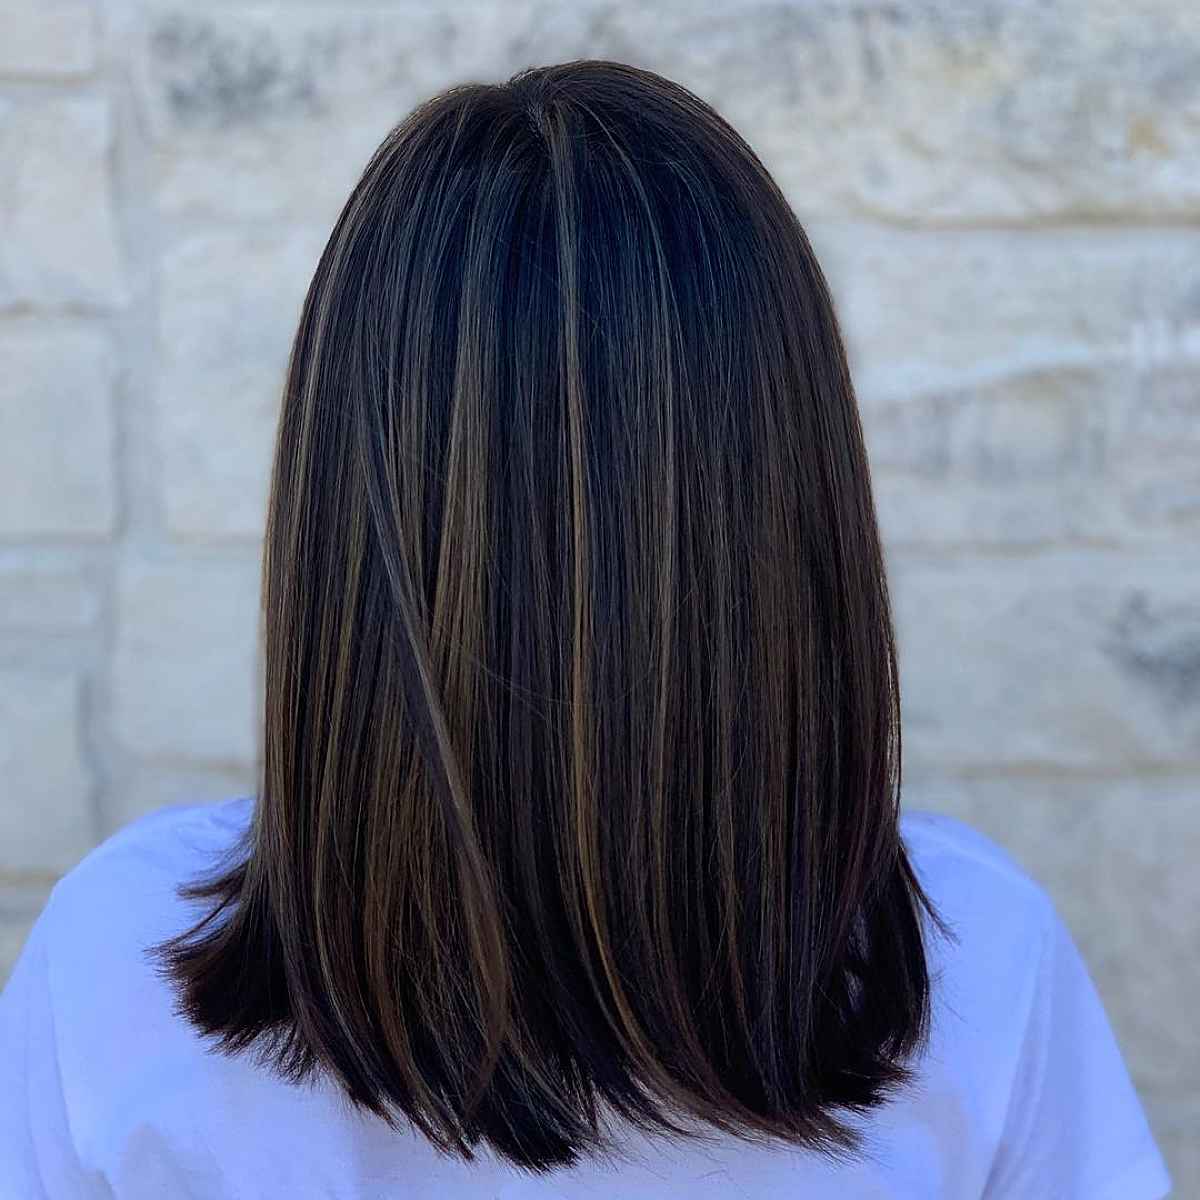 Mid-Length Hair with Cute Partial Blonde Highlights